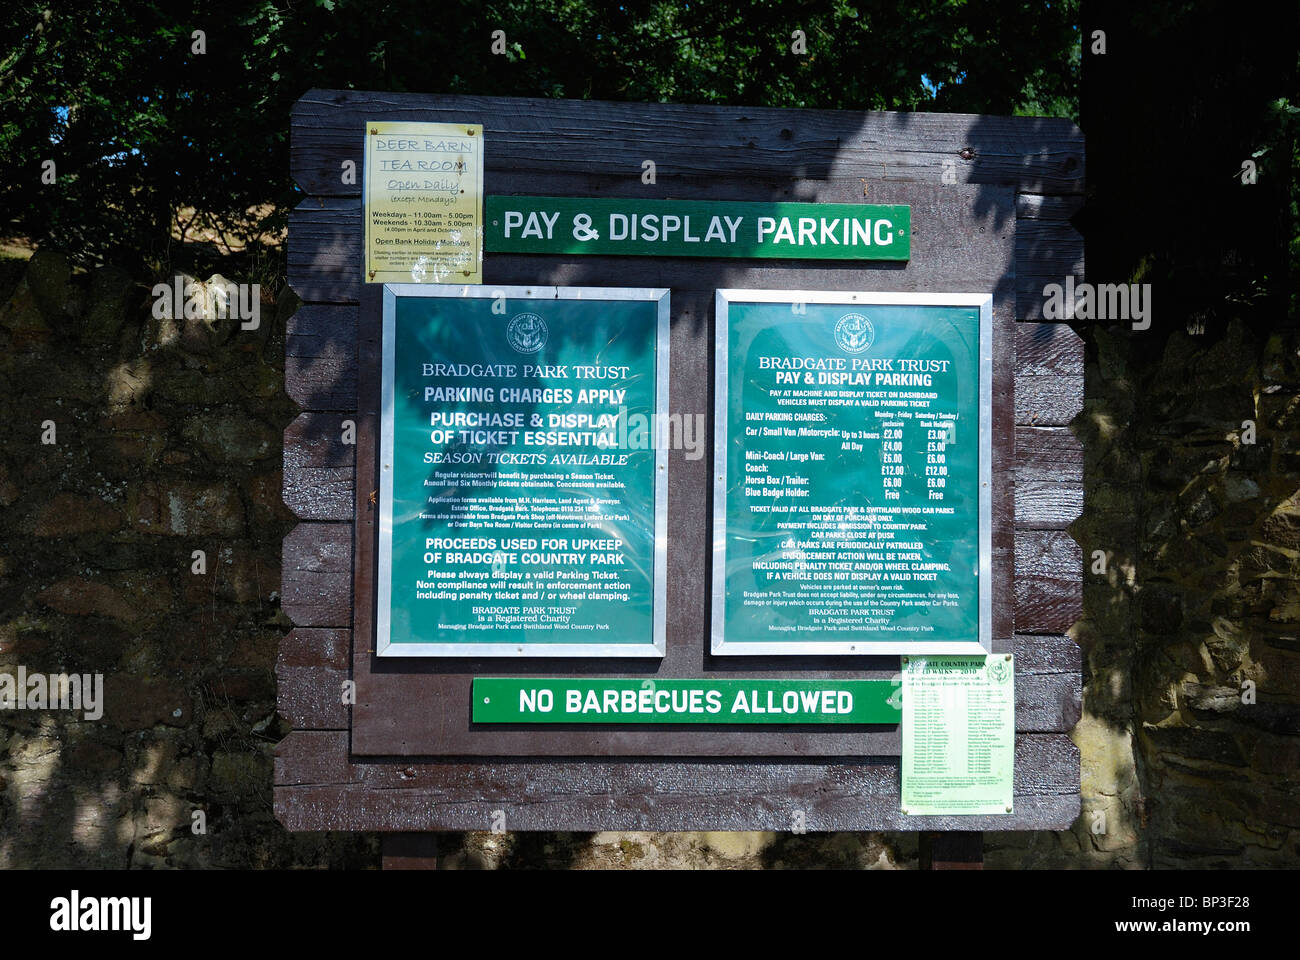 Pay and display parking sign Bradgate park Leicestershire england uk Stock Photo